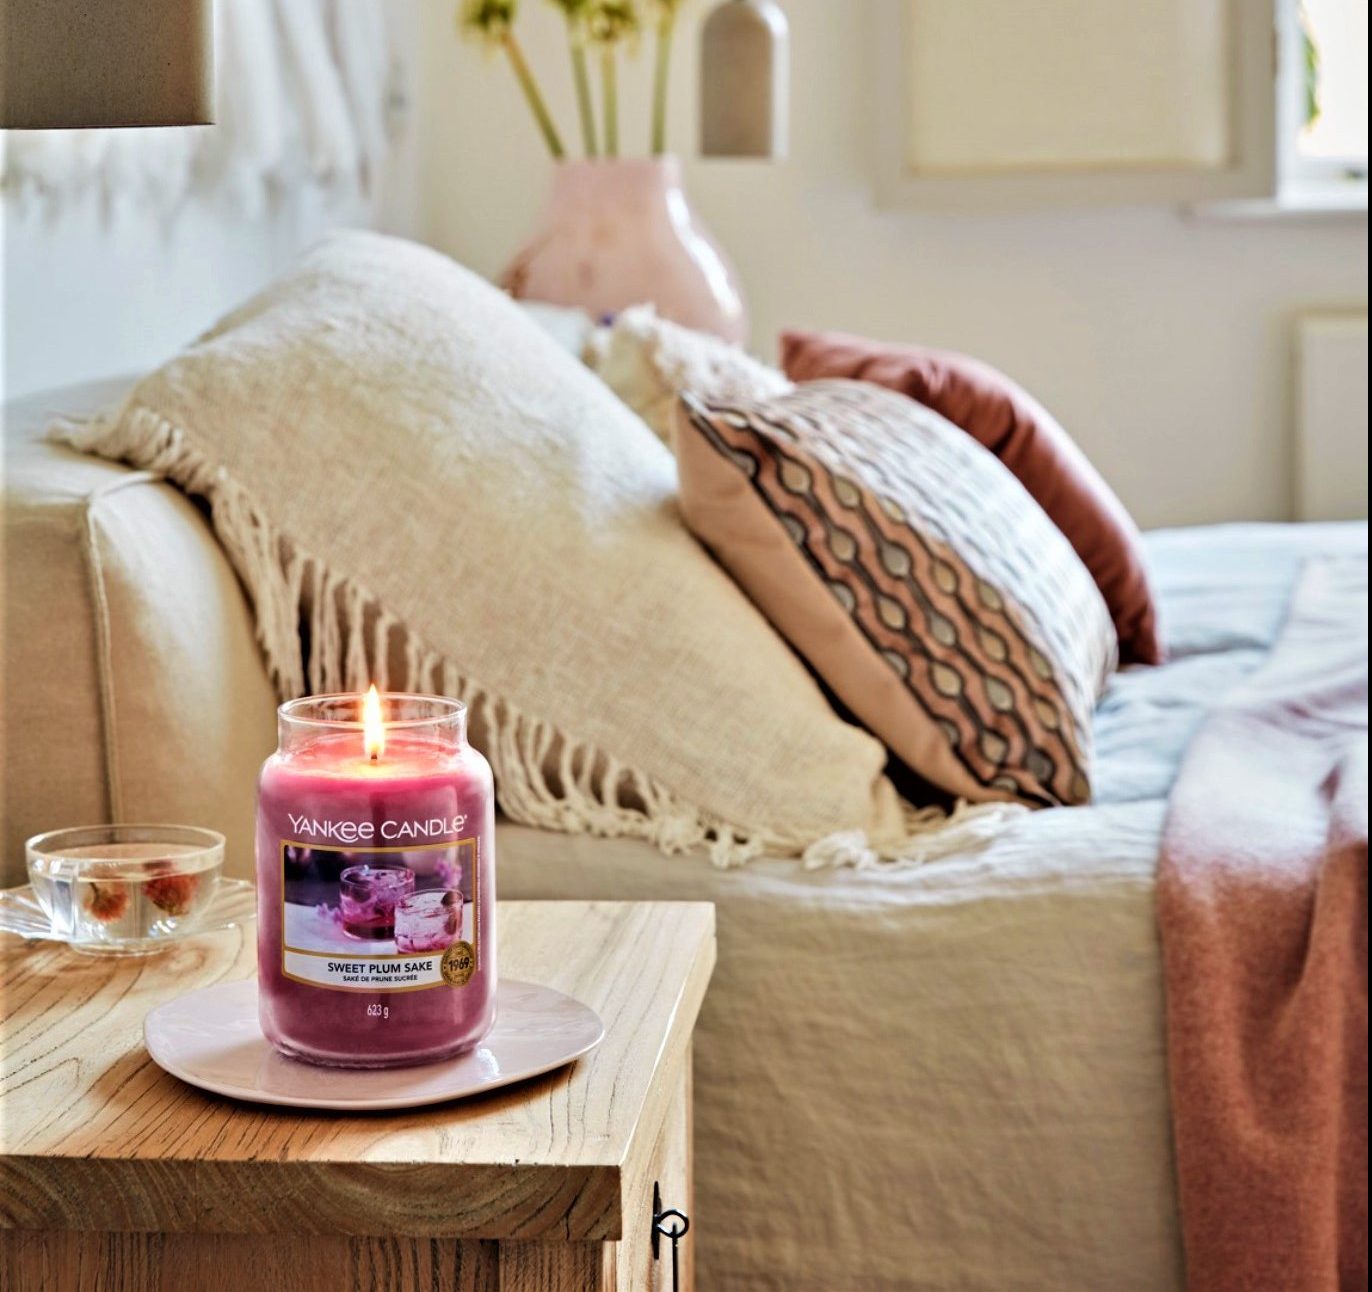 Con Yankee Candle a San Valentino love is in the air - BUONGIORNO online